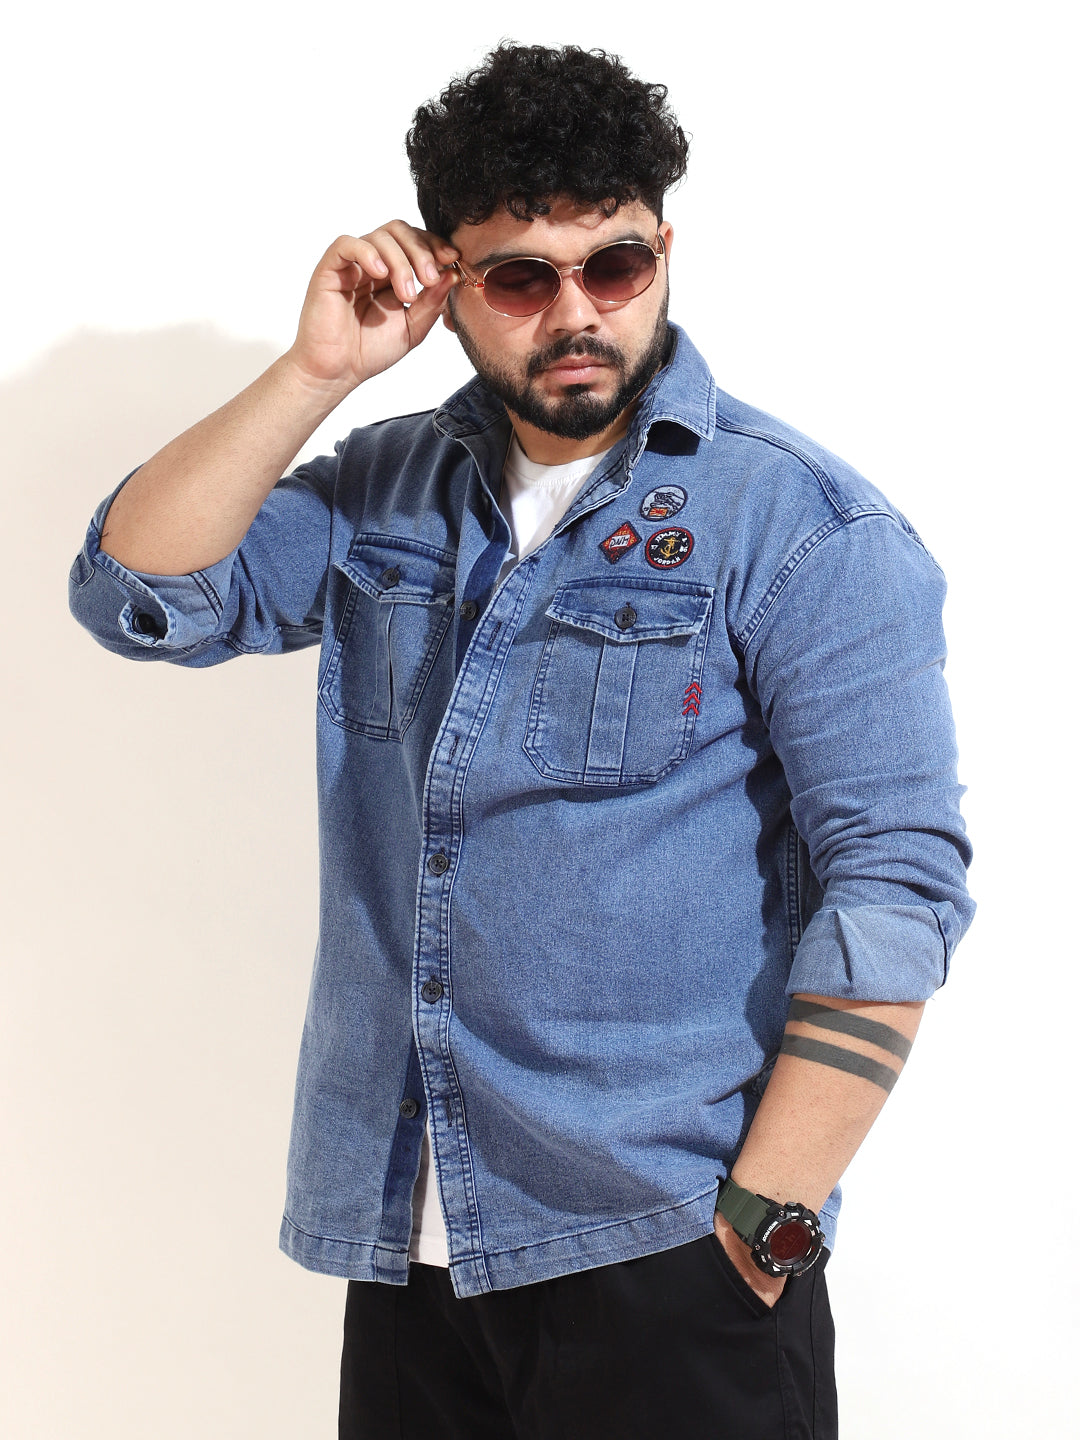 MUFTI Plain Blue Double Pocket Denim Slim Fit Shirt (Blue, Size: 5XL) in  Sagar at best price by Arropa Factory Buy - Justdial